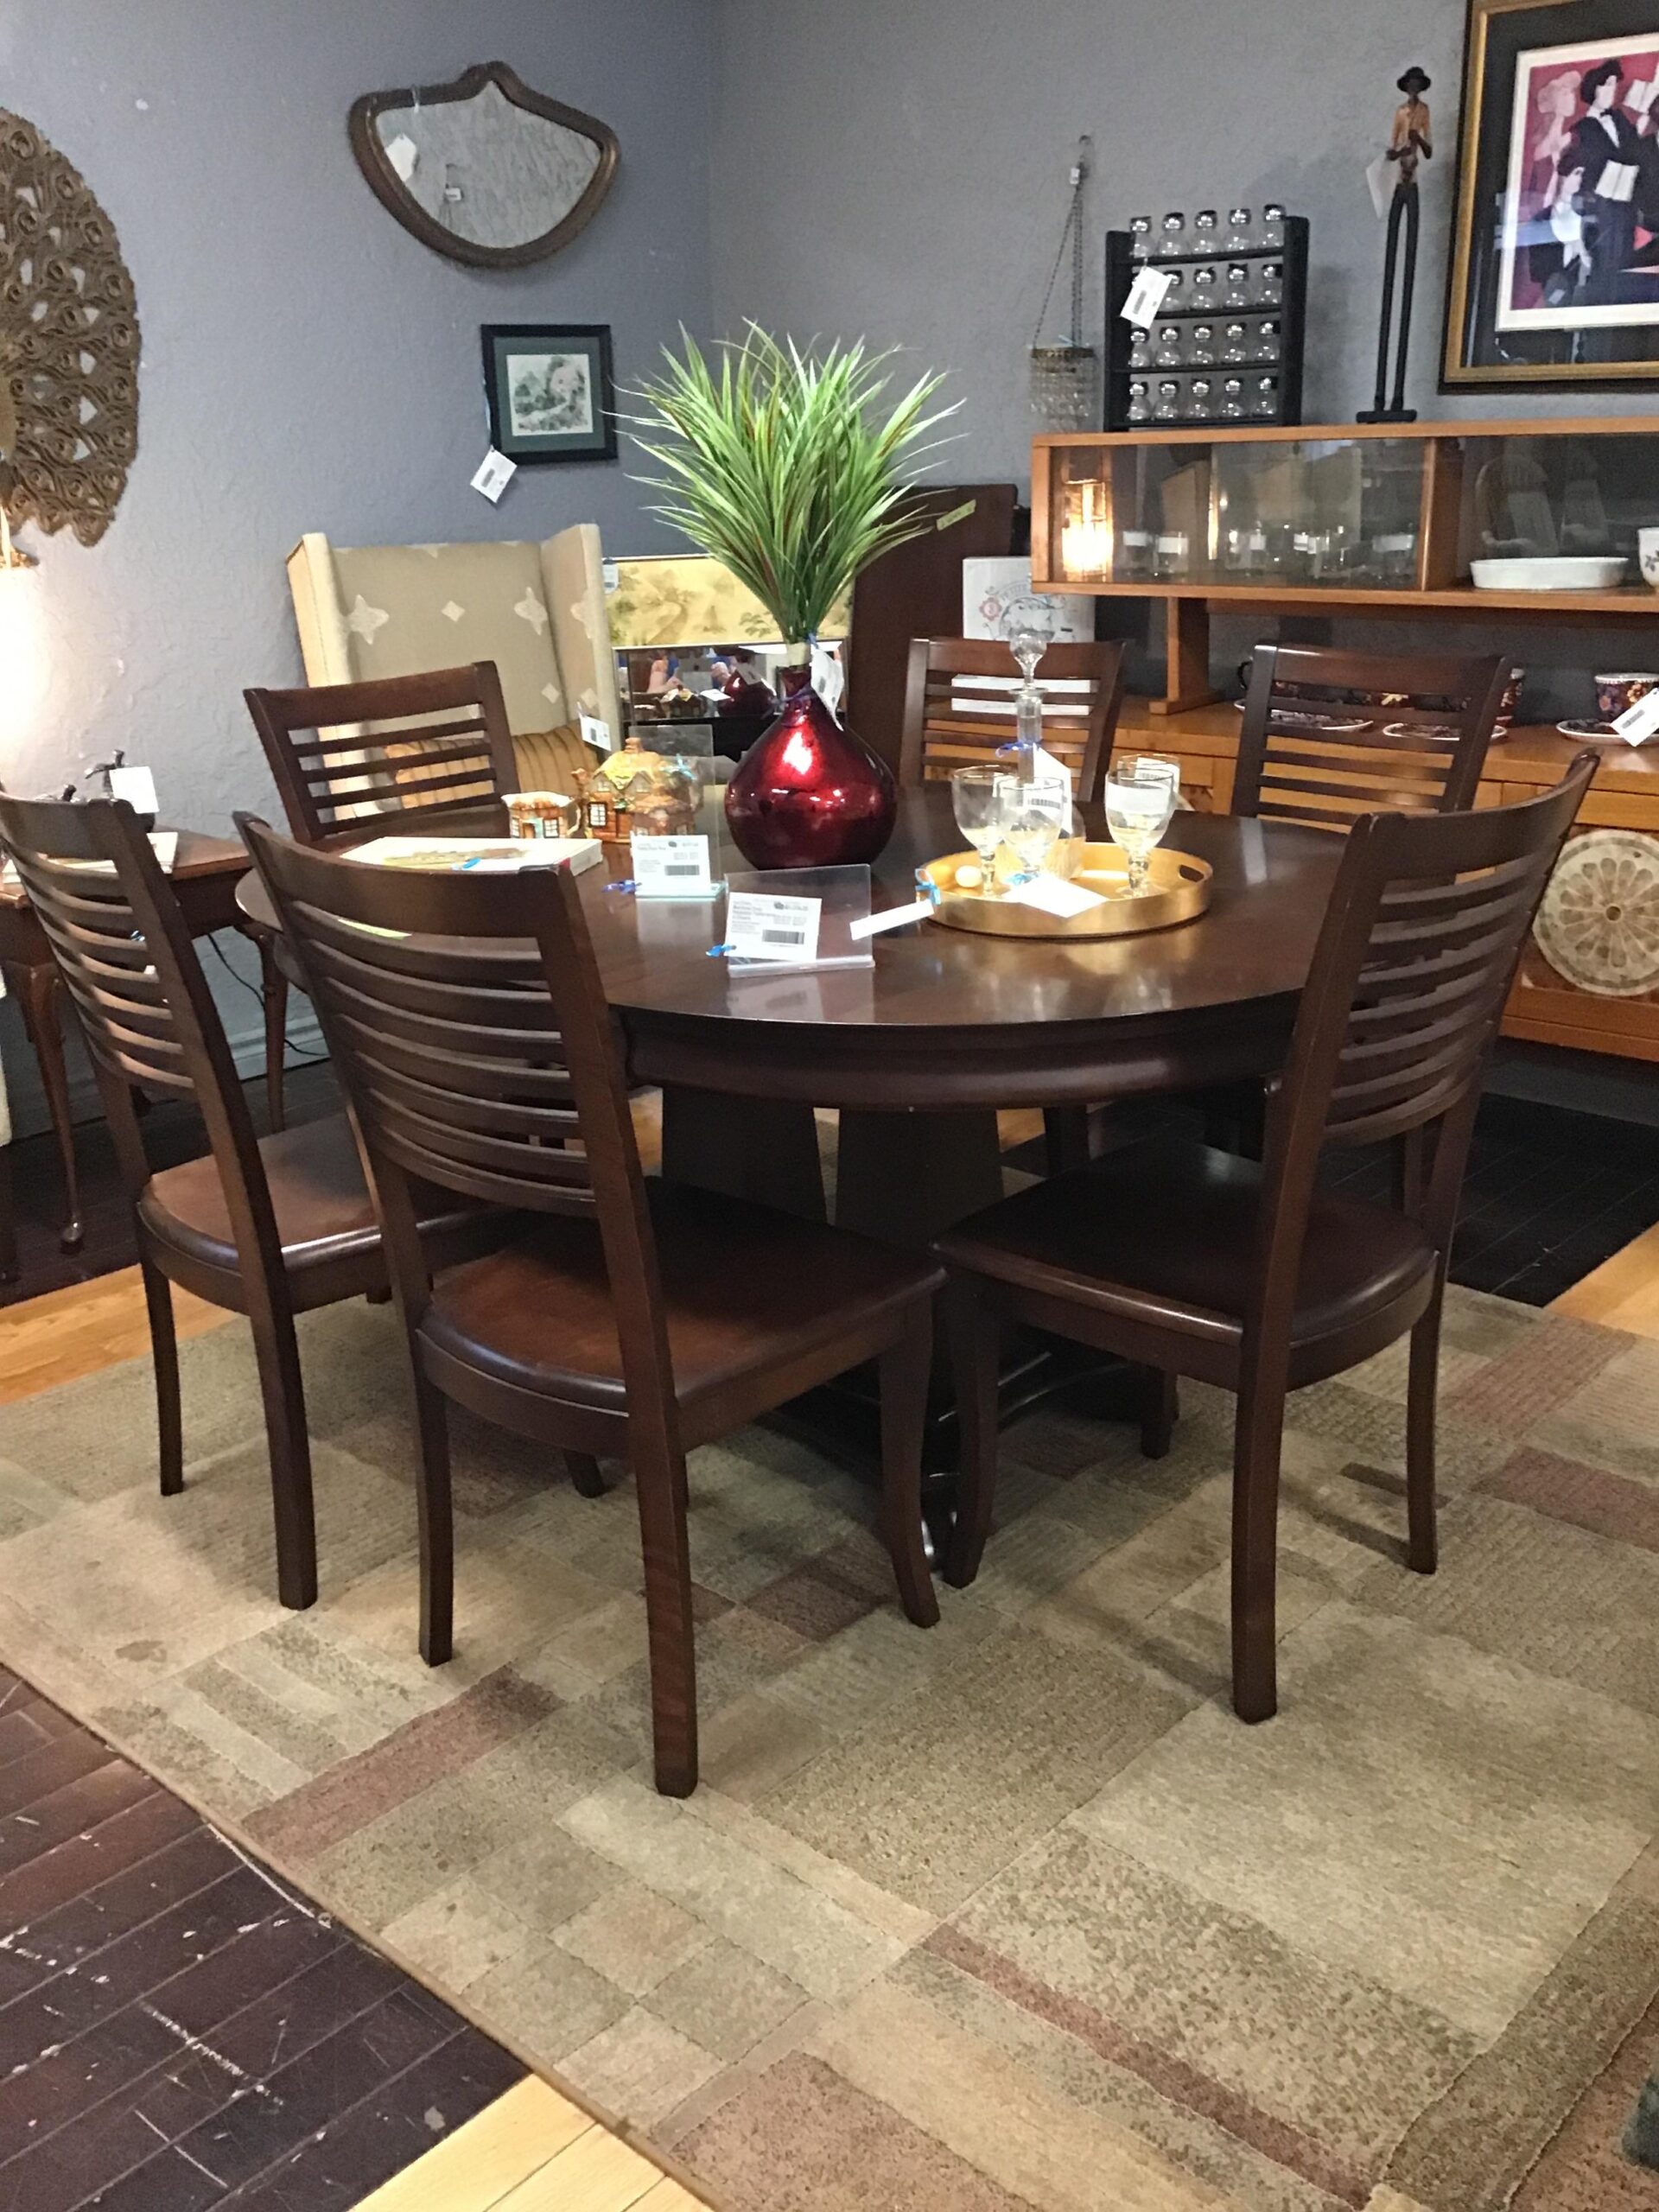 Bermex Oval Pedestal Table and 6 Chairs